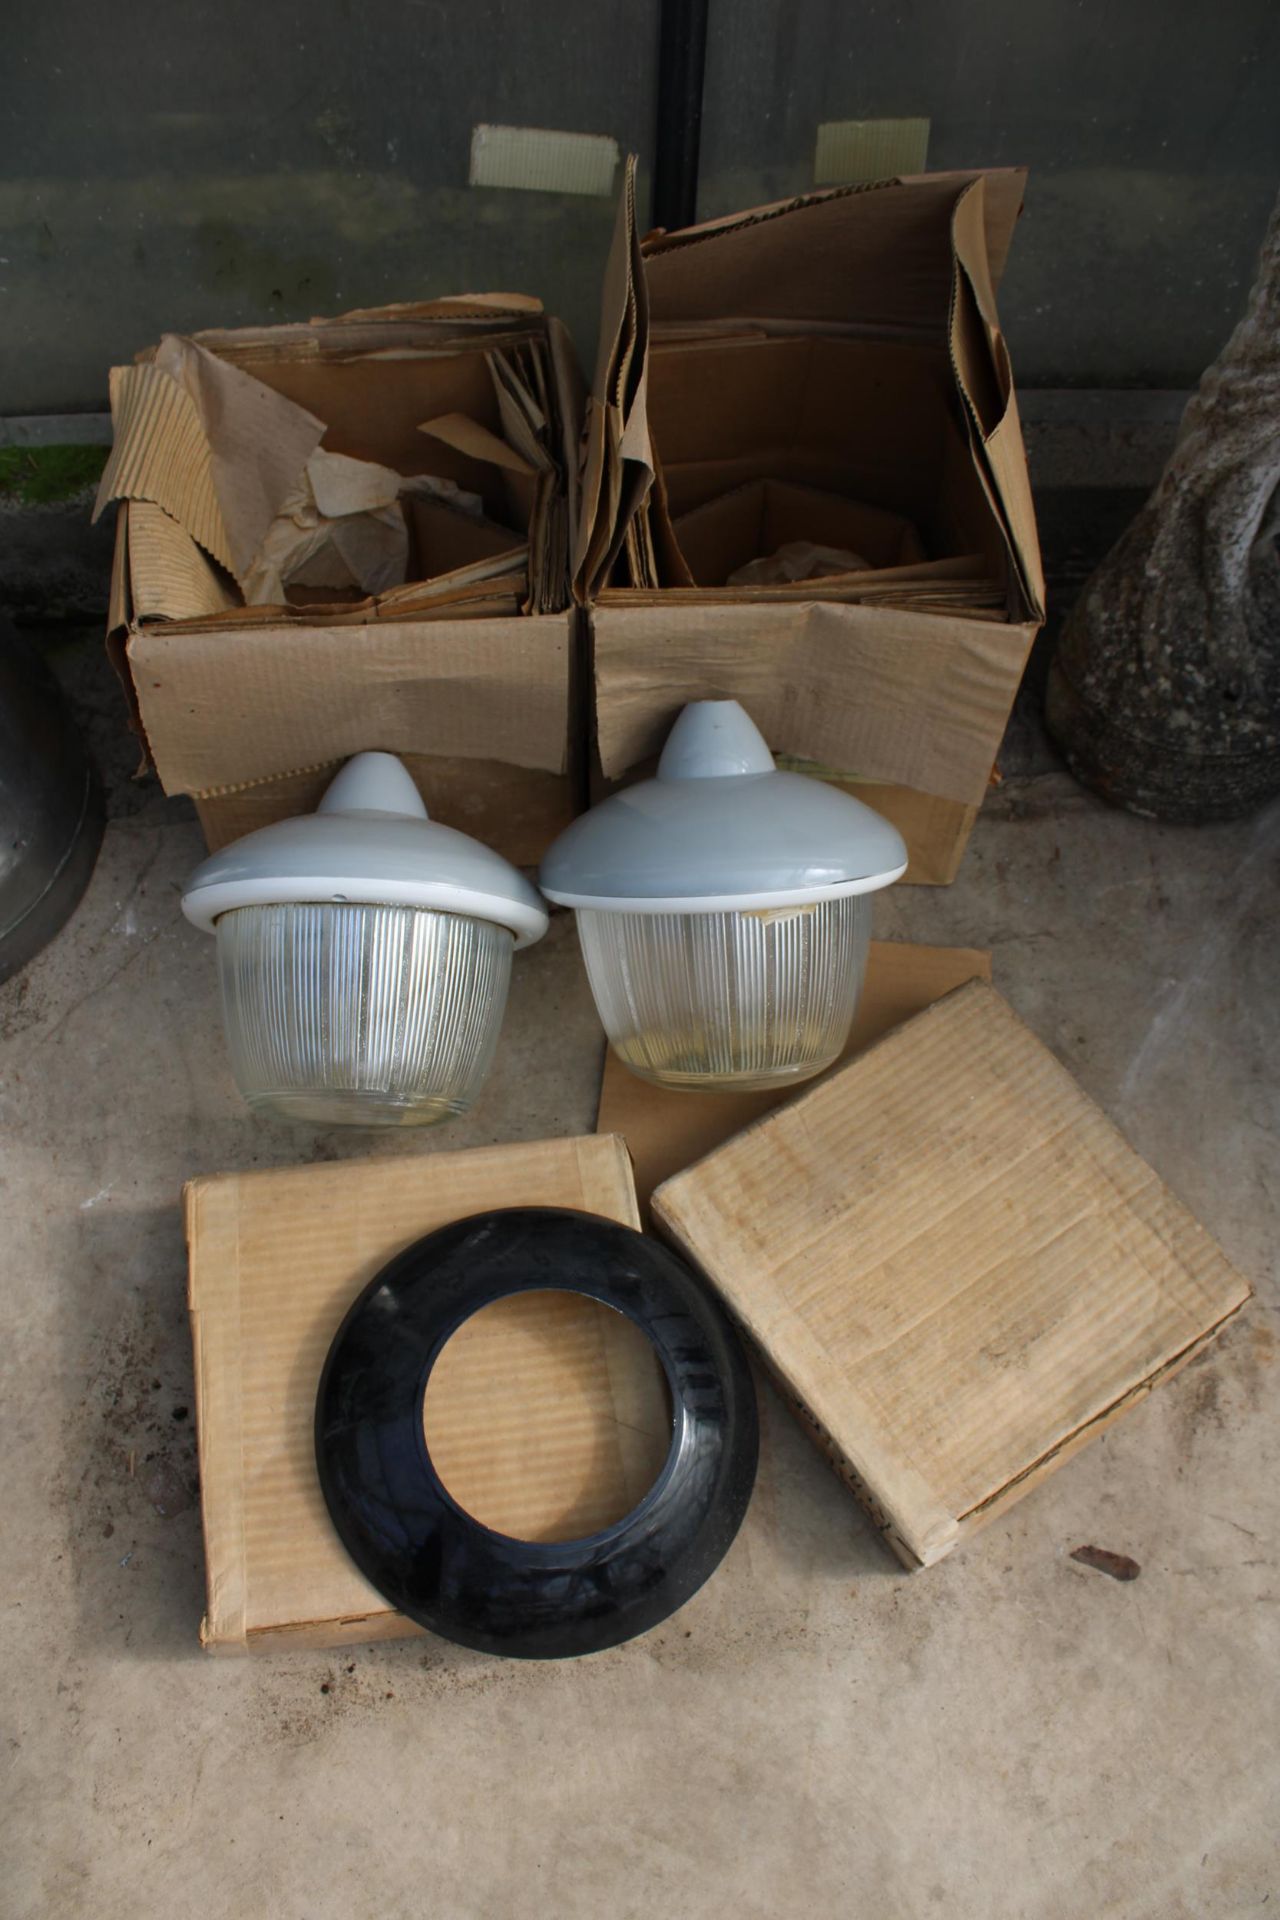 A PAIR OF AS NEW RETRO COUGHTRIE GLASGOW LIGHT FITTINGS